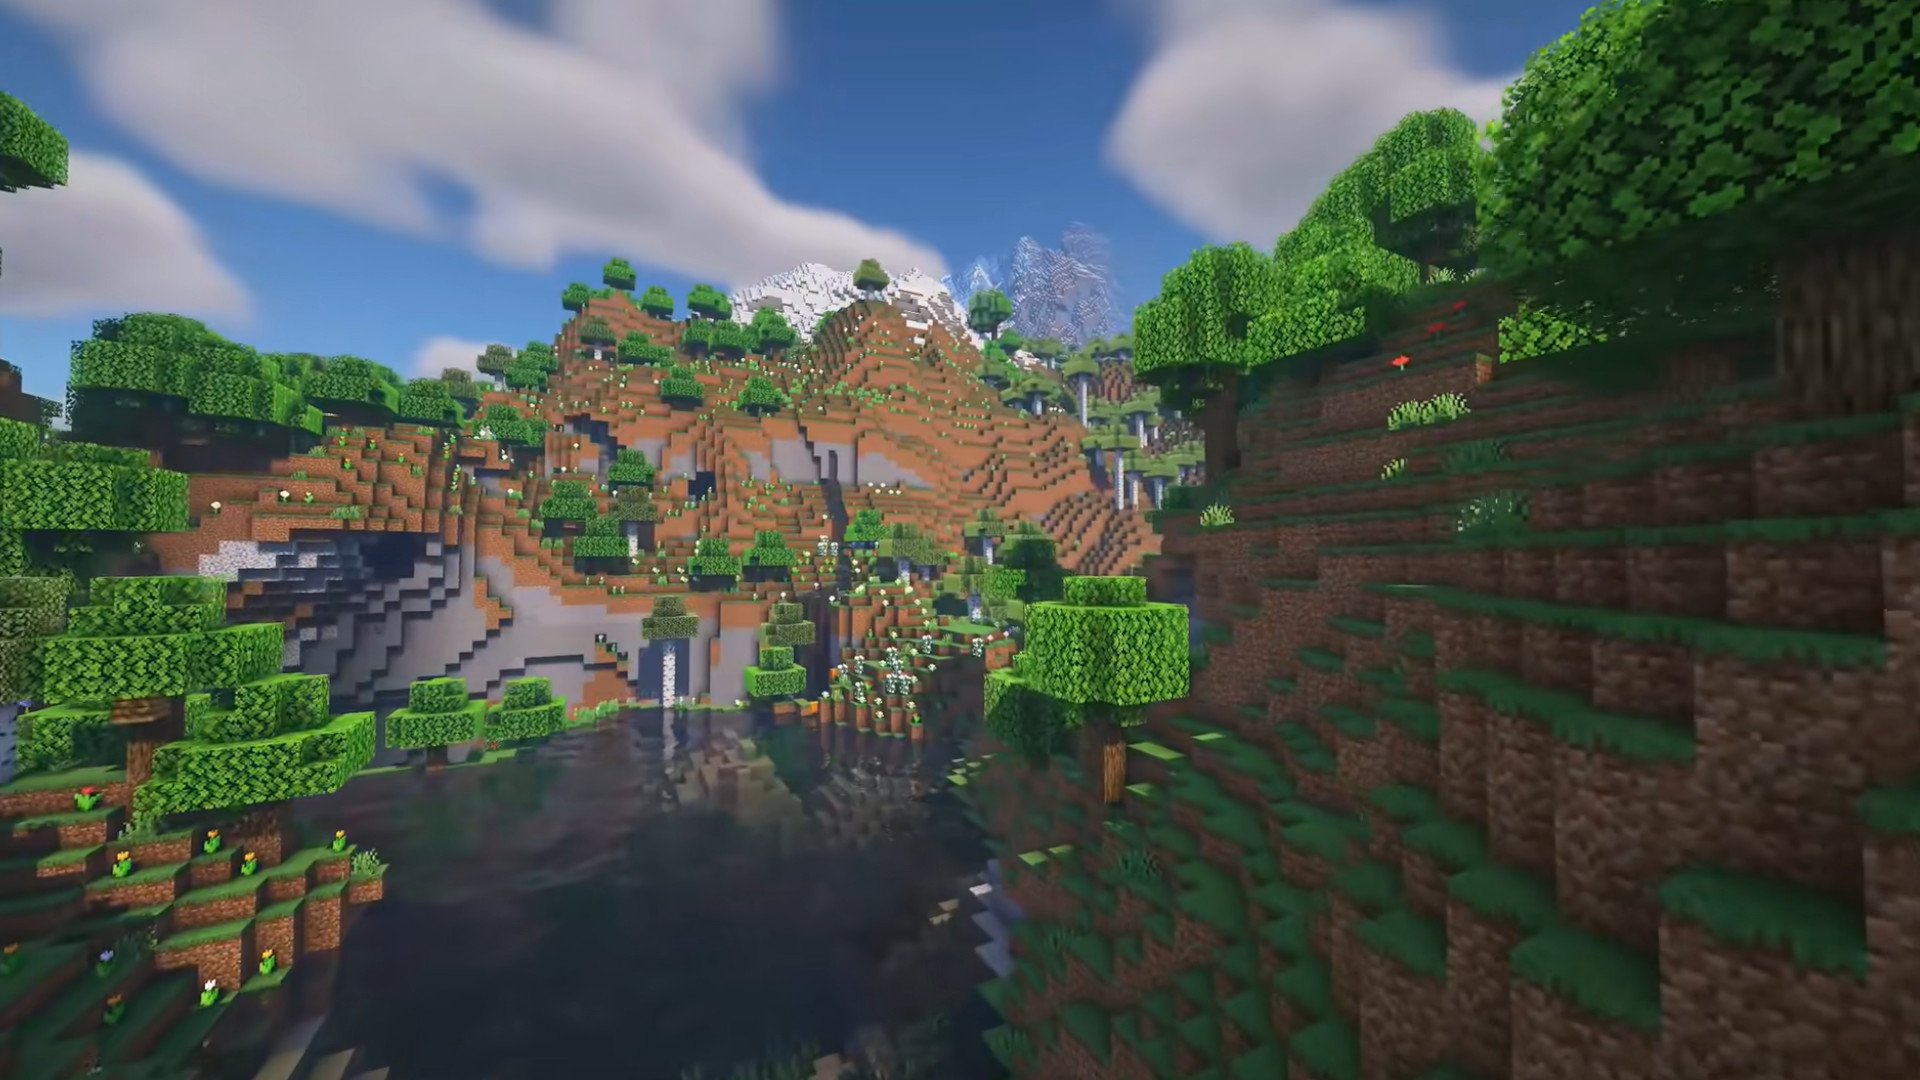 Minecraft’s new natural environments are getting even better